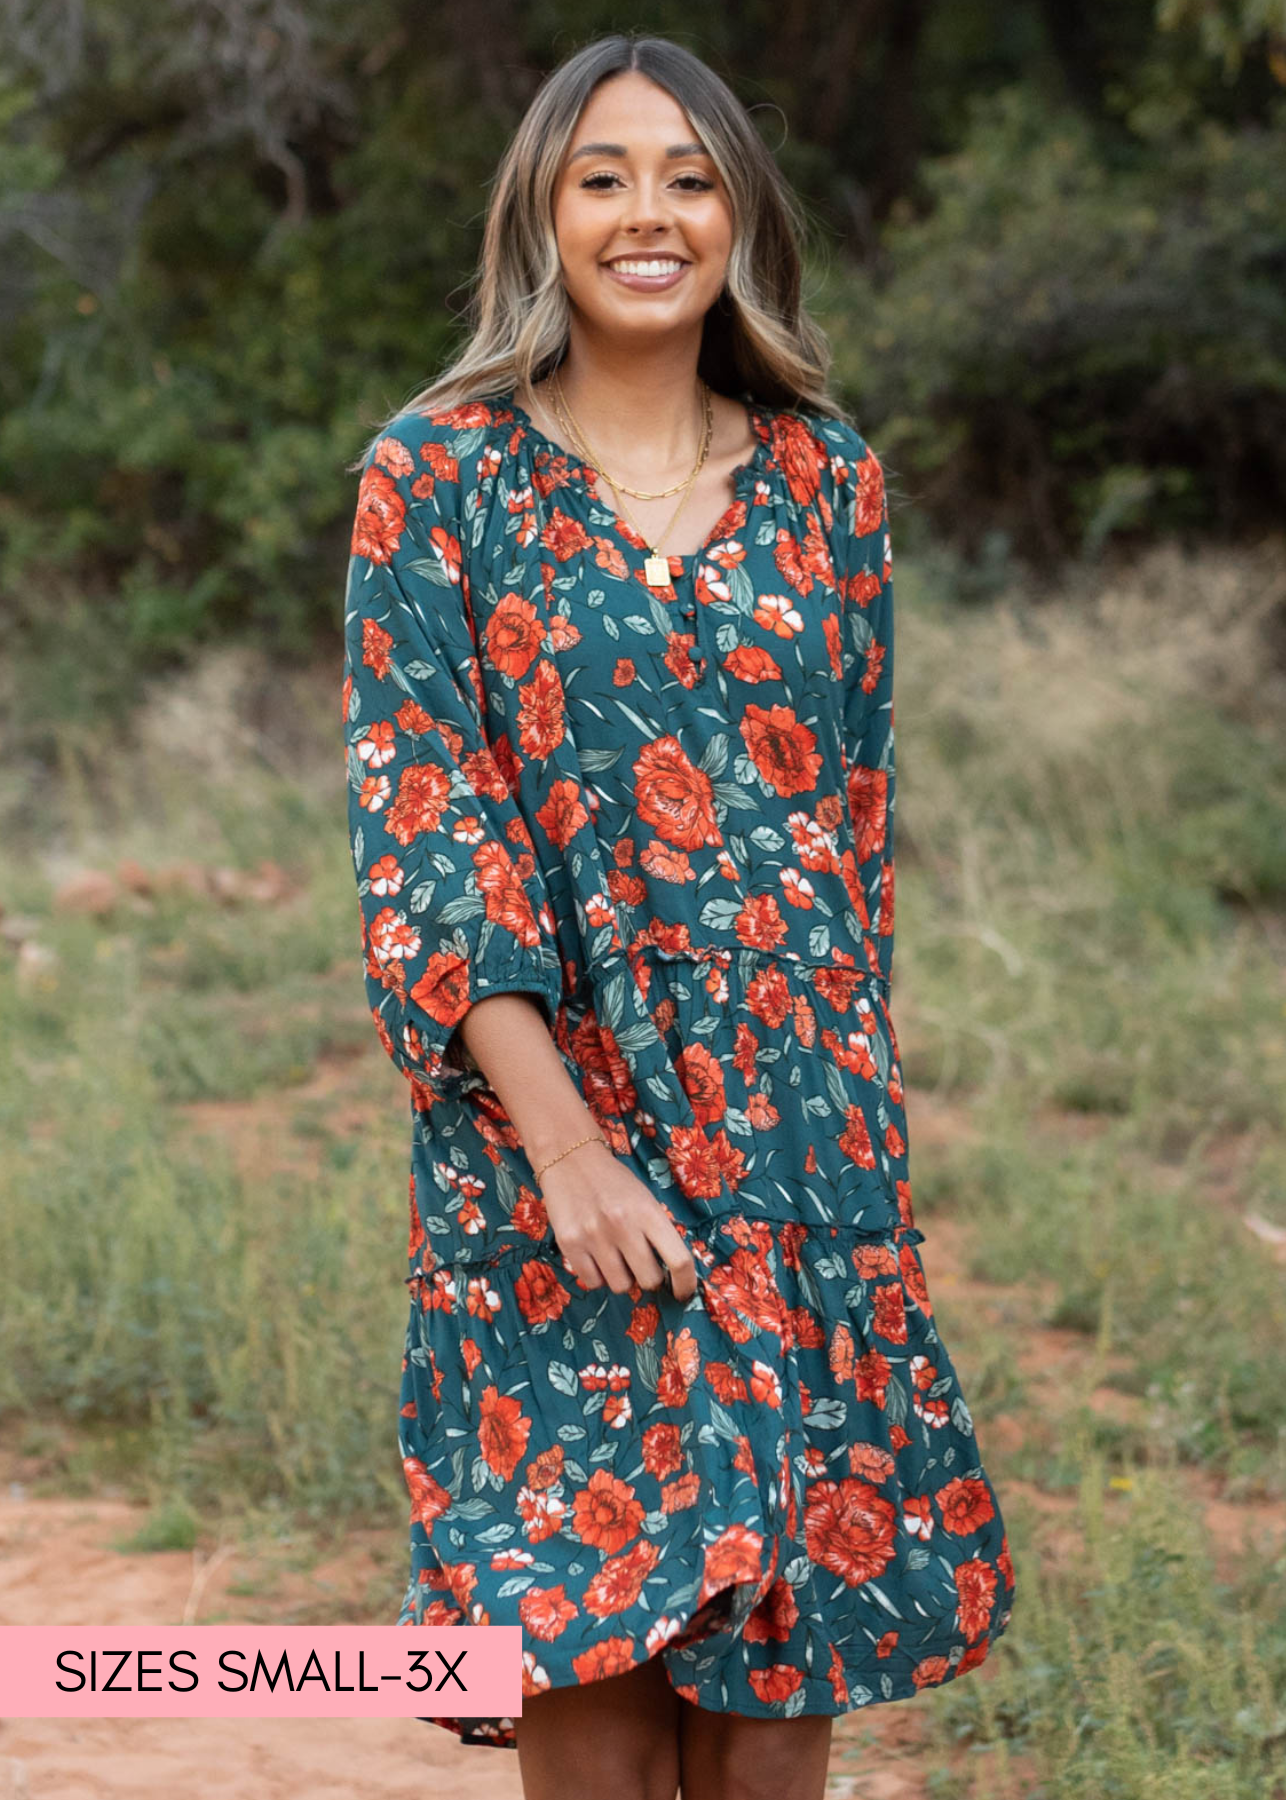 Teal floral dress with 3/4 sleeves